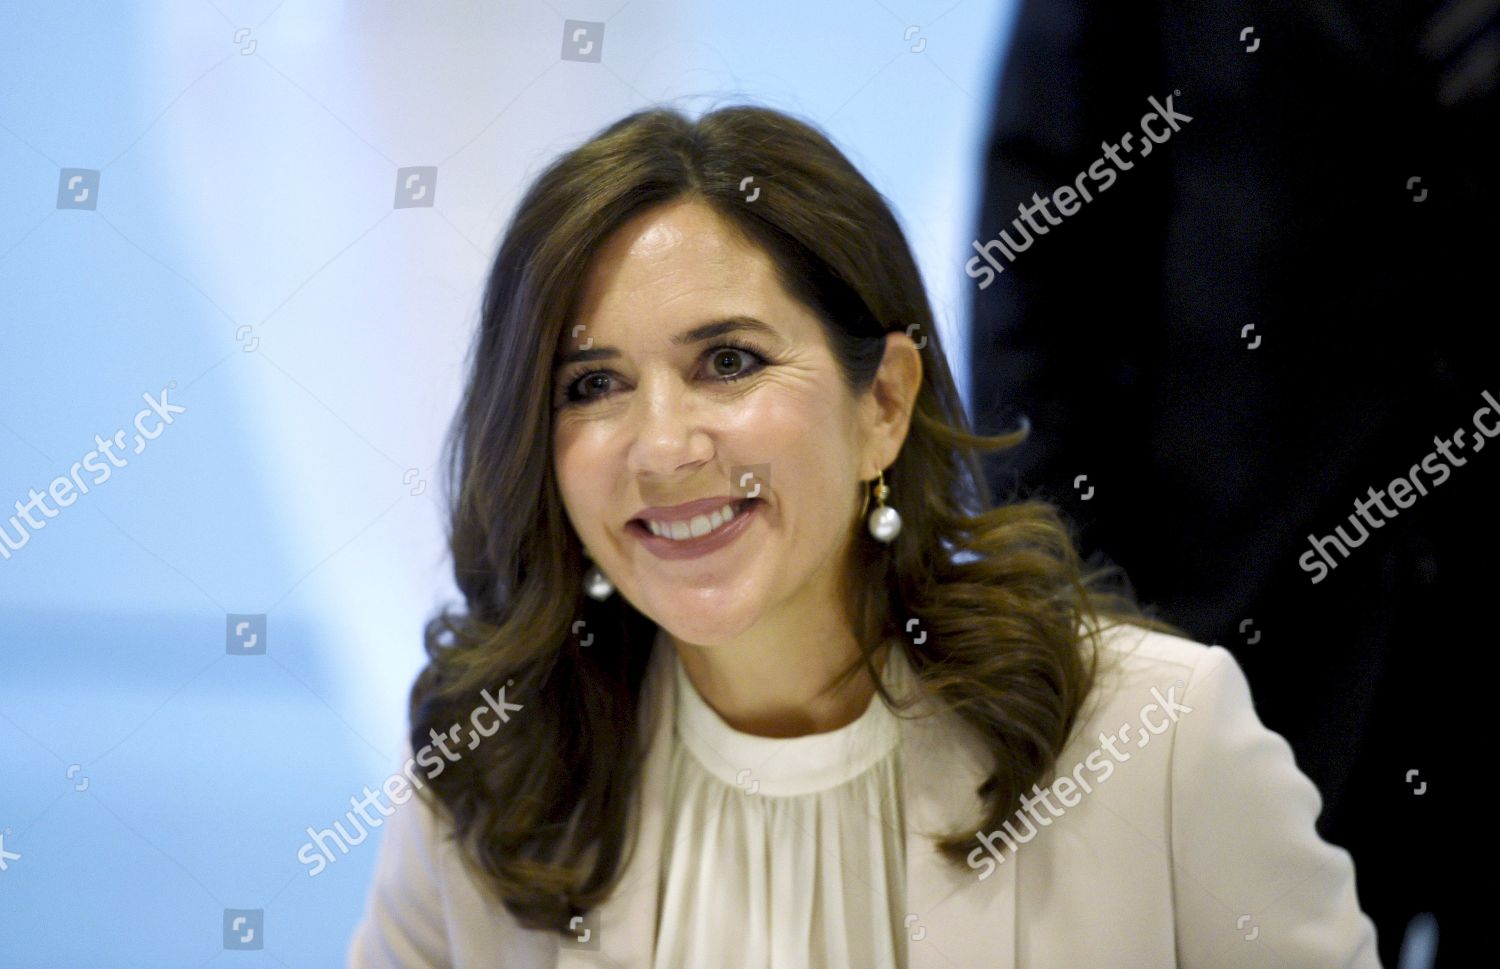 crown-princess-mary-visit-to-finland-shutterstock-editorial-9881096j.jpg